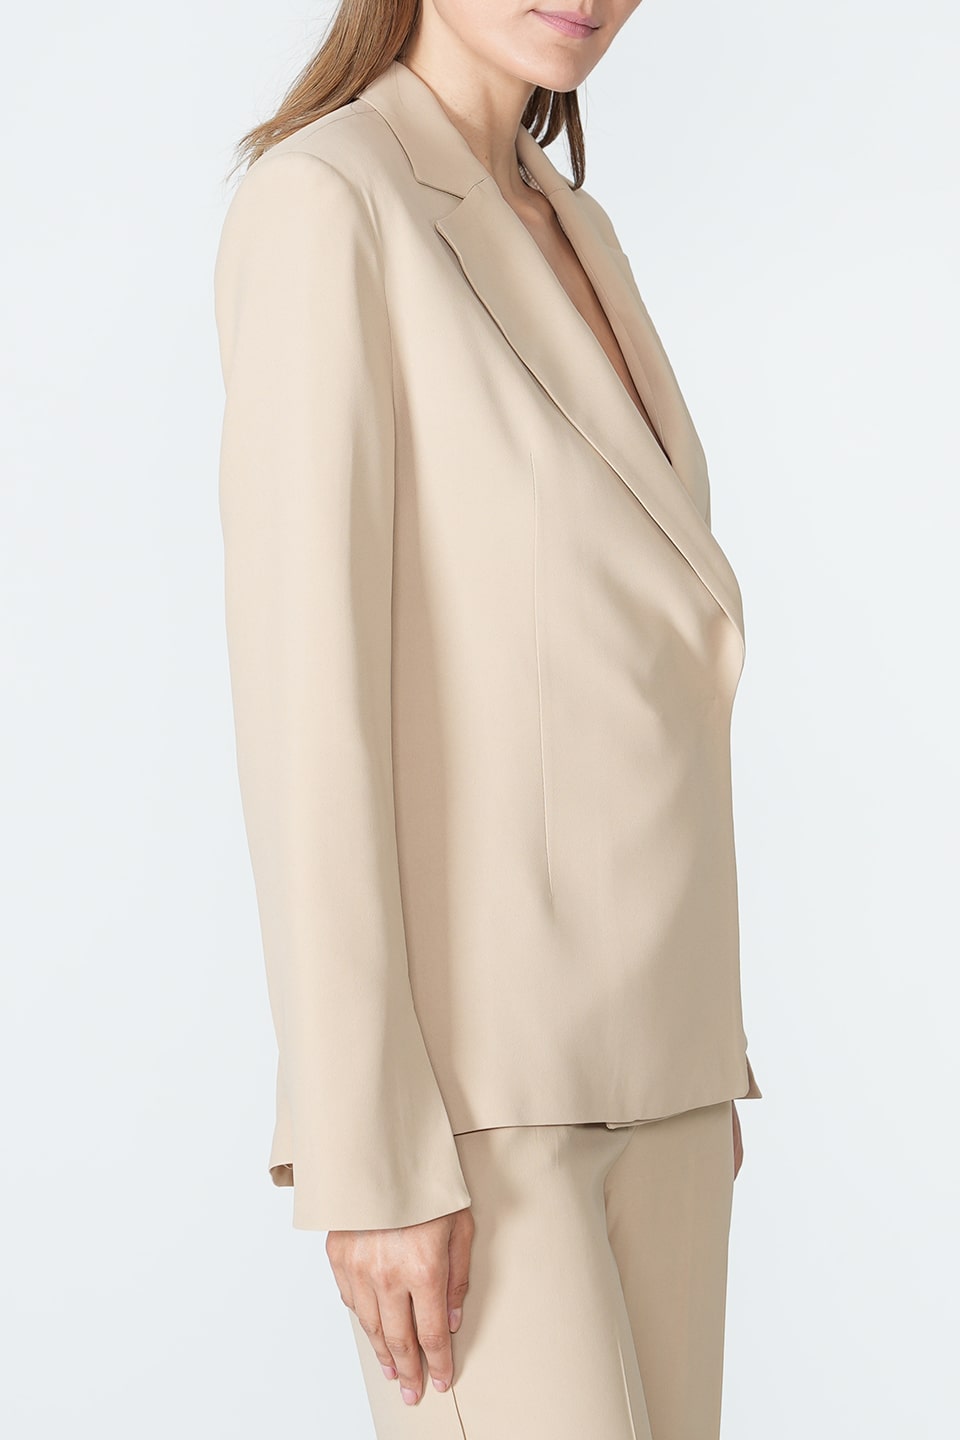 Designer Beige Women blazers, shop online with free delivery in UAE. Product gallery 3